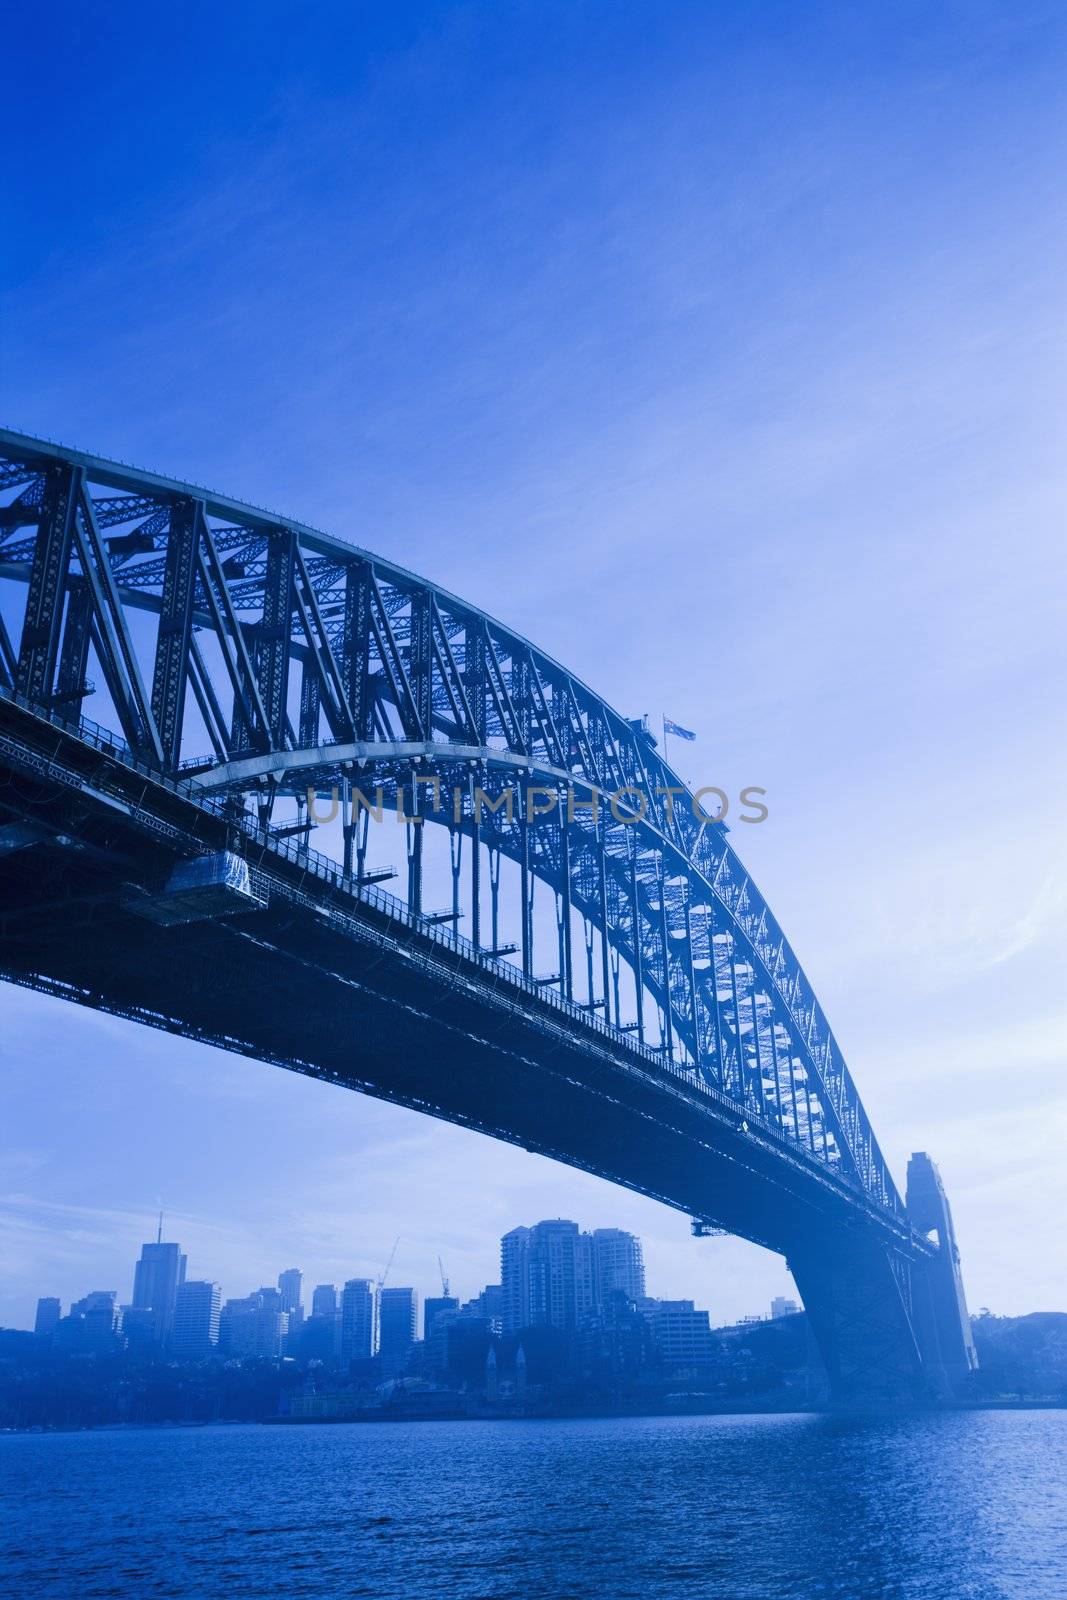 Low angle view of Sydney Harbour Bridge in Australia with view of harbour and downtown skyline.